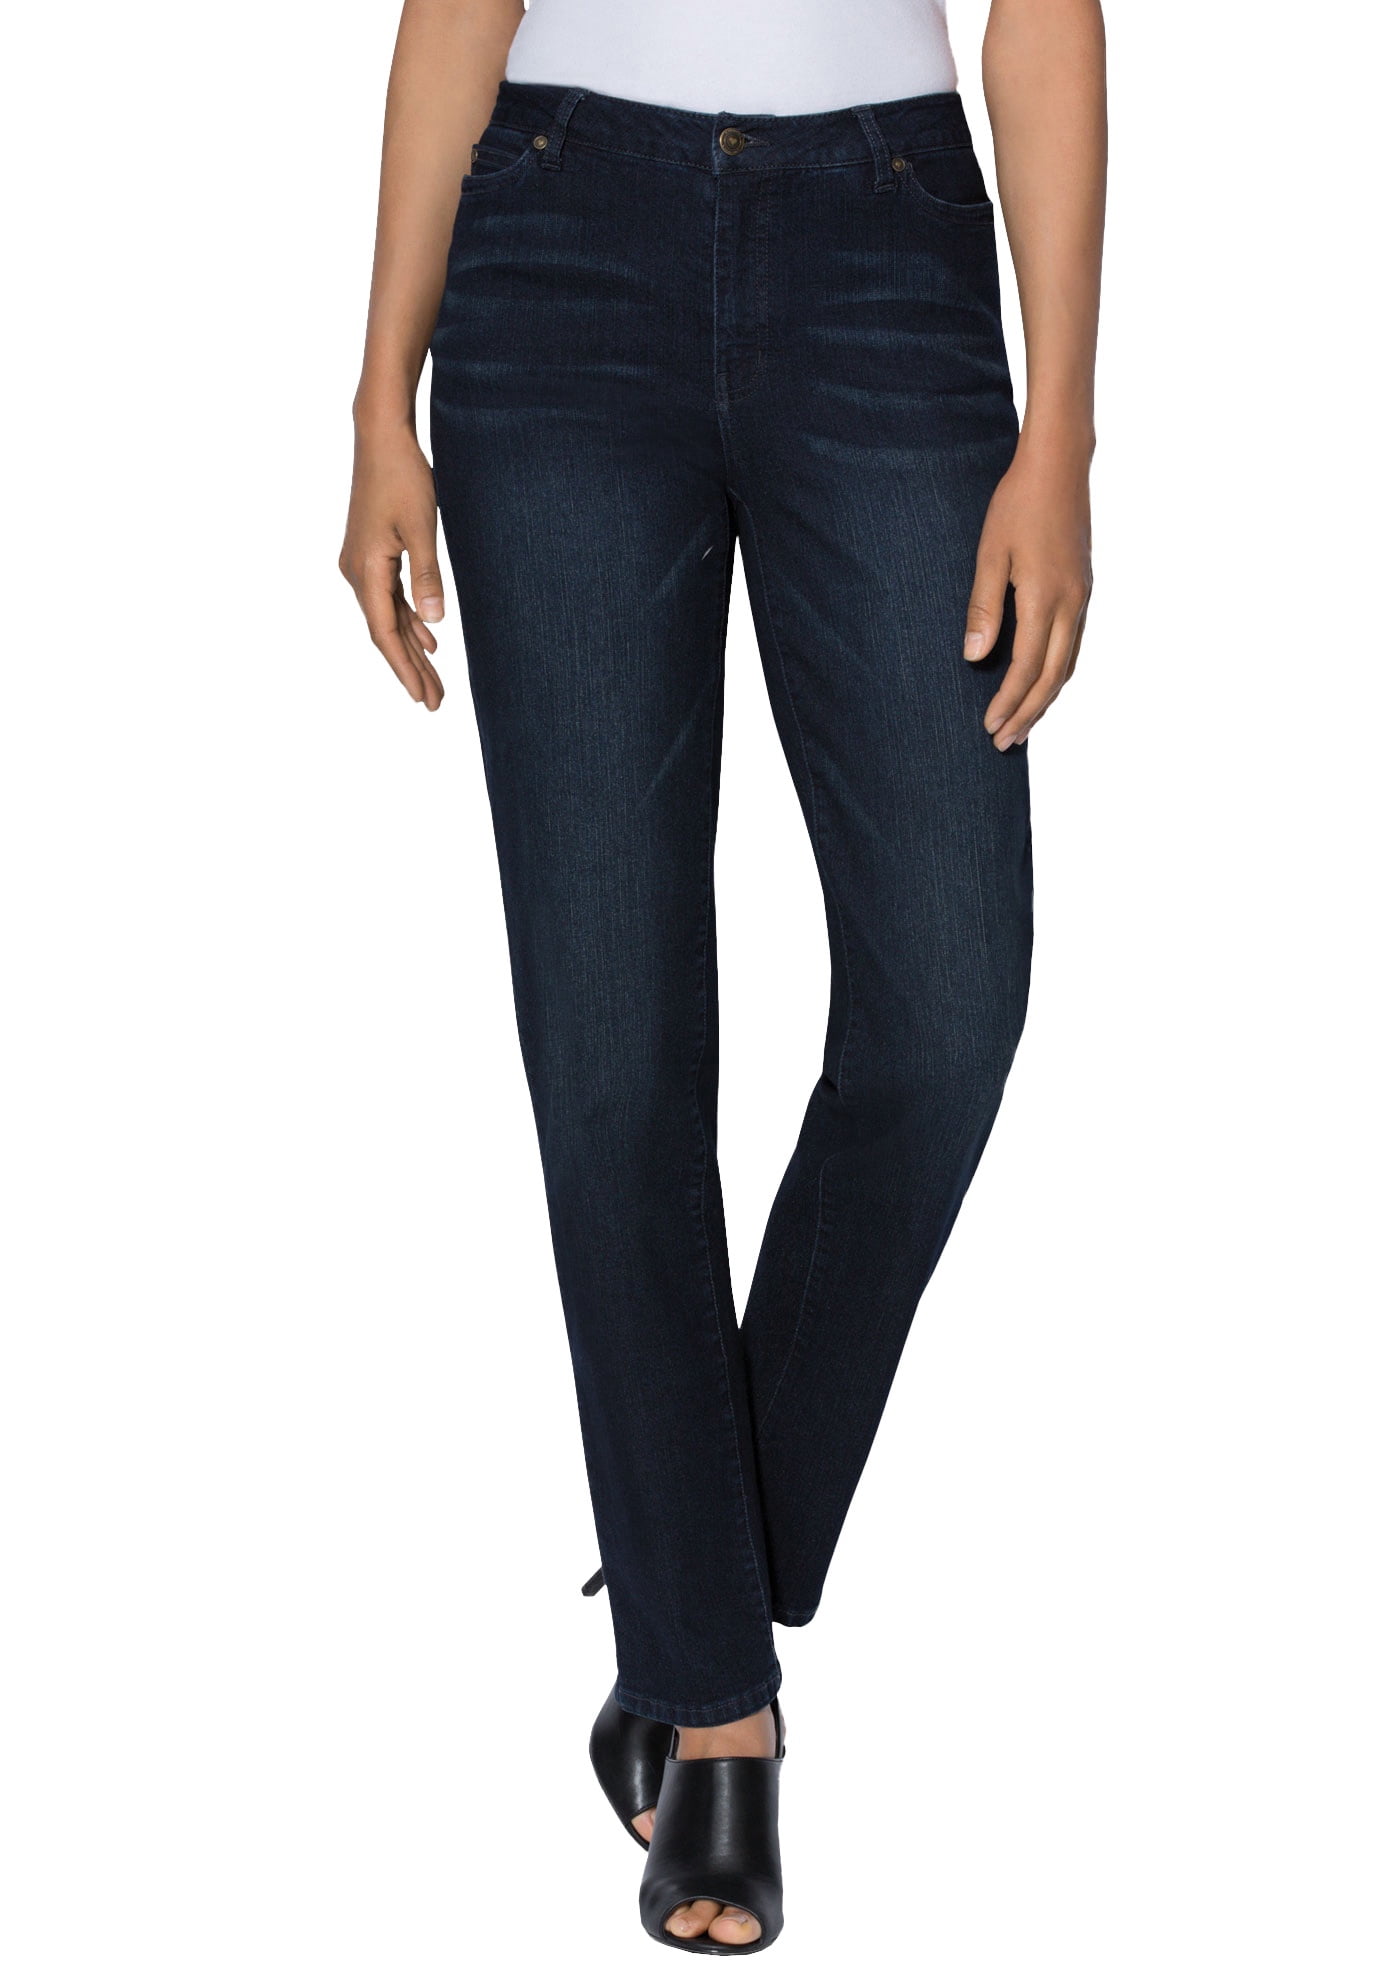 Roamans Women's Plus Size Straight-Leg Jean With Invisible Stretch Jean ...